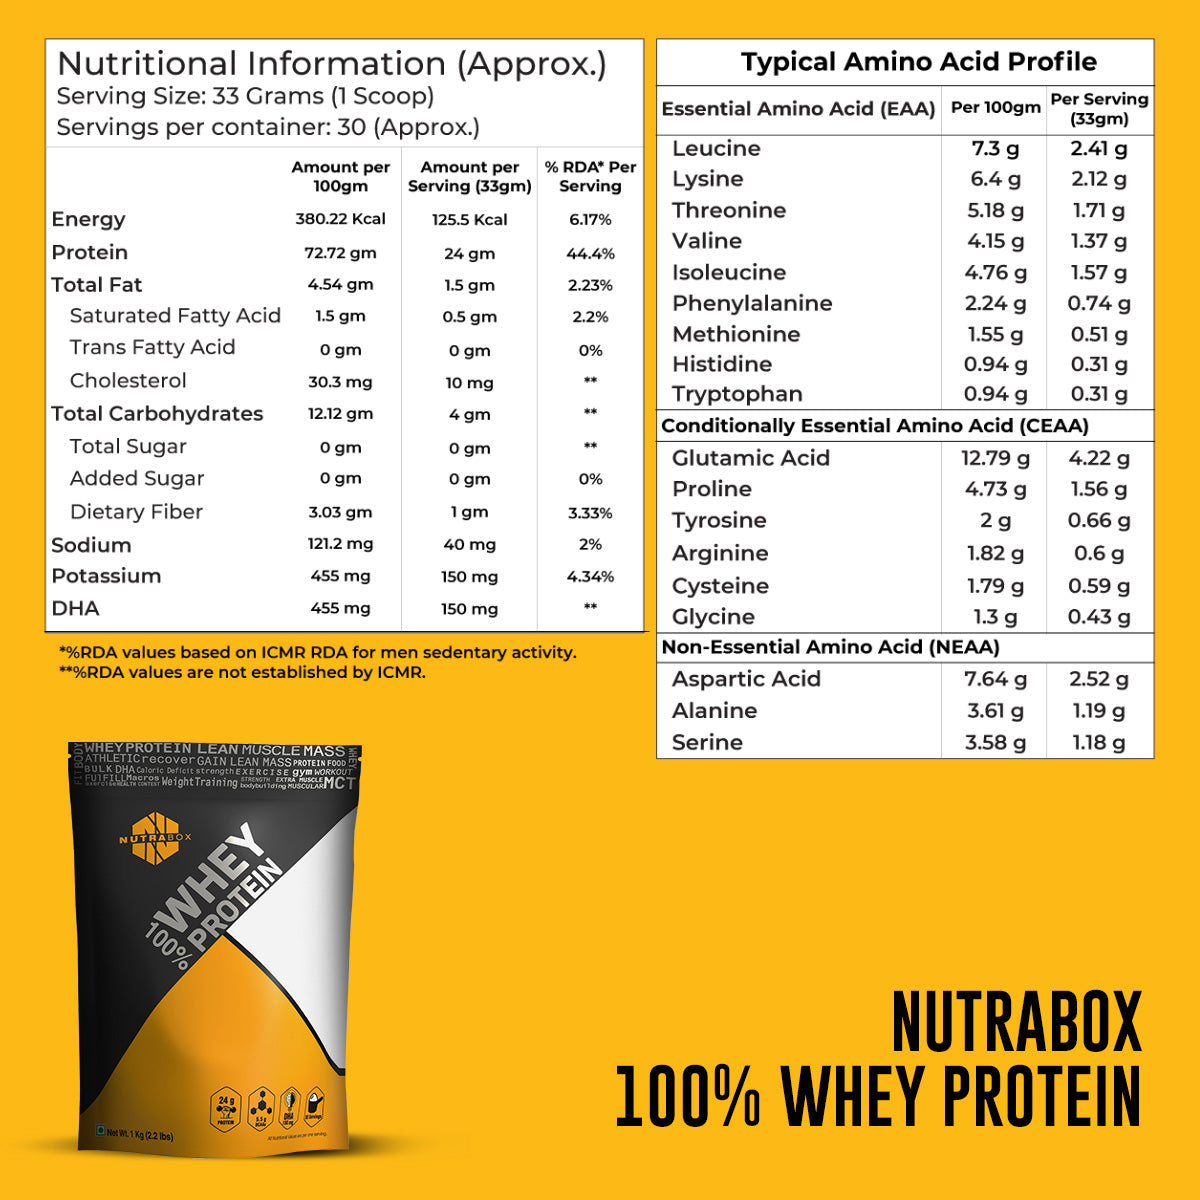 Nutritional Info of Nutrabox 100% Whey Protein